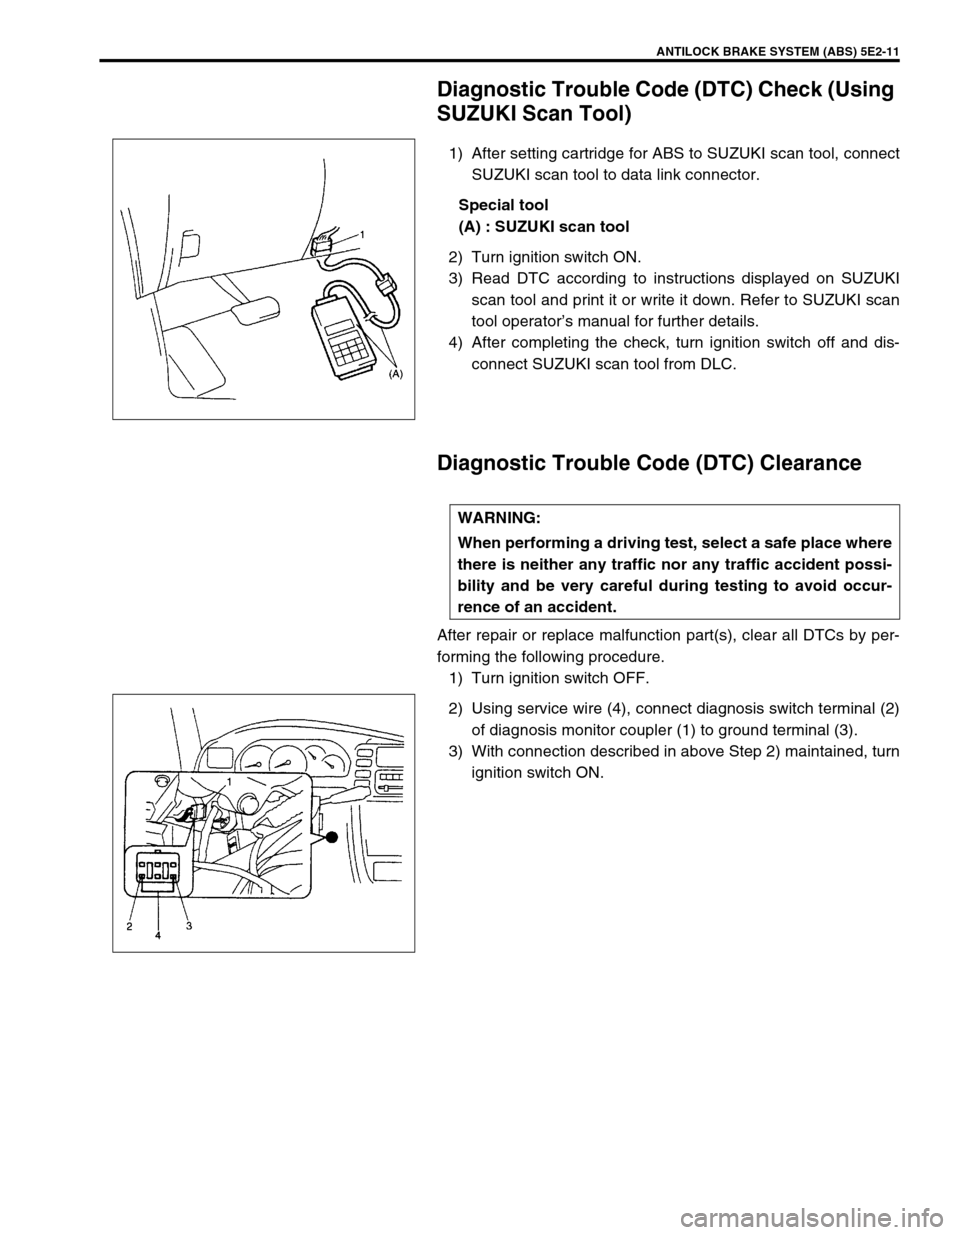 SUZUKI GRAND VITARA 2001 2.G Owners Manual ANTILOCK BRAKE SYSTEM (ABS) 5E2-11
Diagnostic Trouble Code (DTC) Check (Using 
SUZUKI Scan Tool)
1) After setting cartridge for ABS to SUZUKI scan tool, connect
SUZUKI scan tool to data link connector